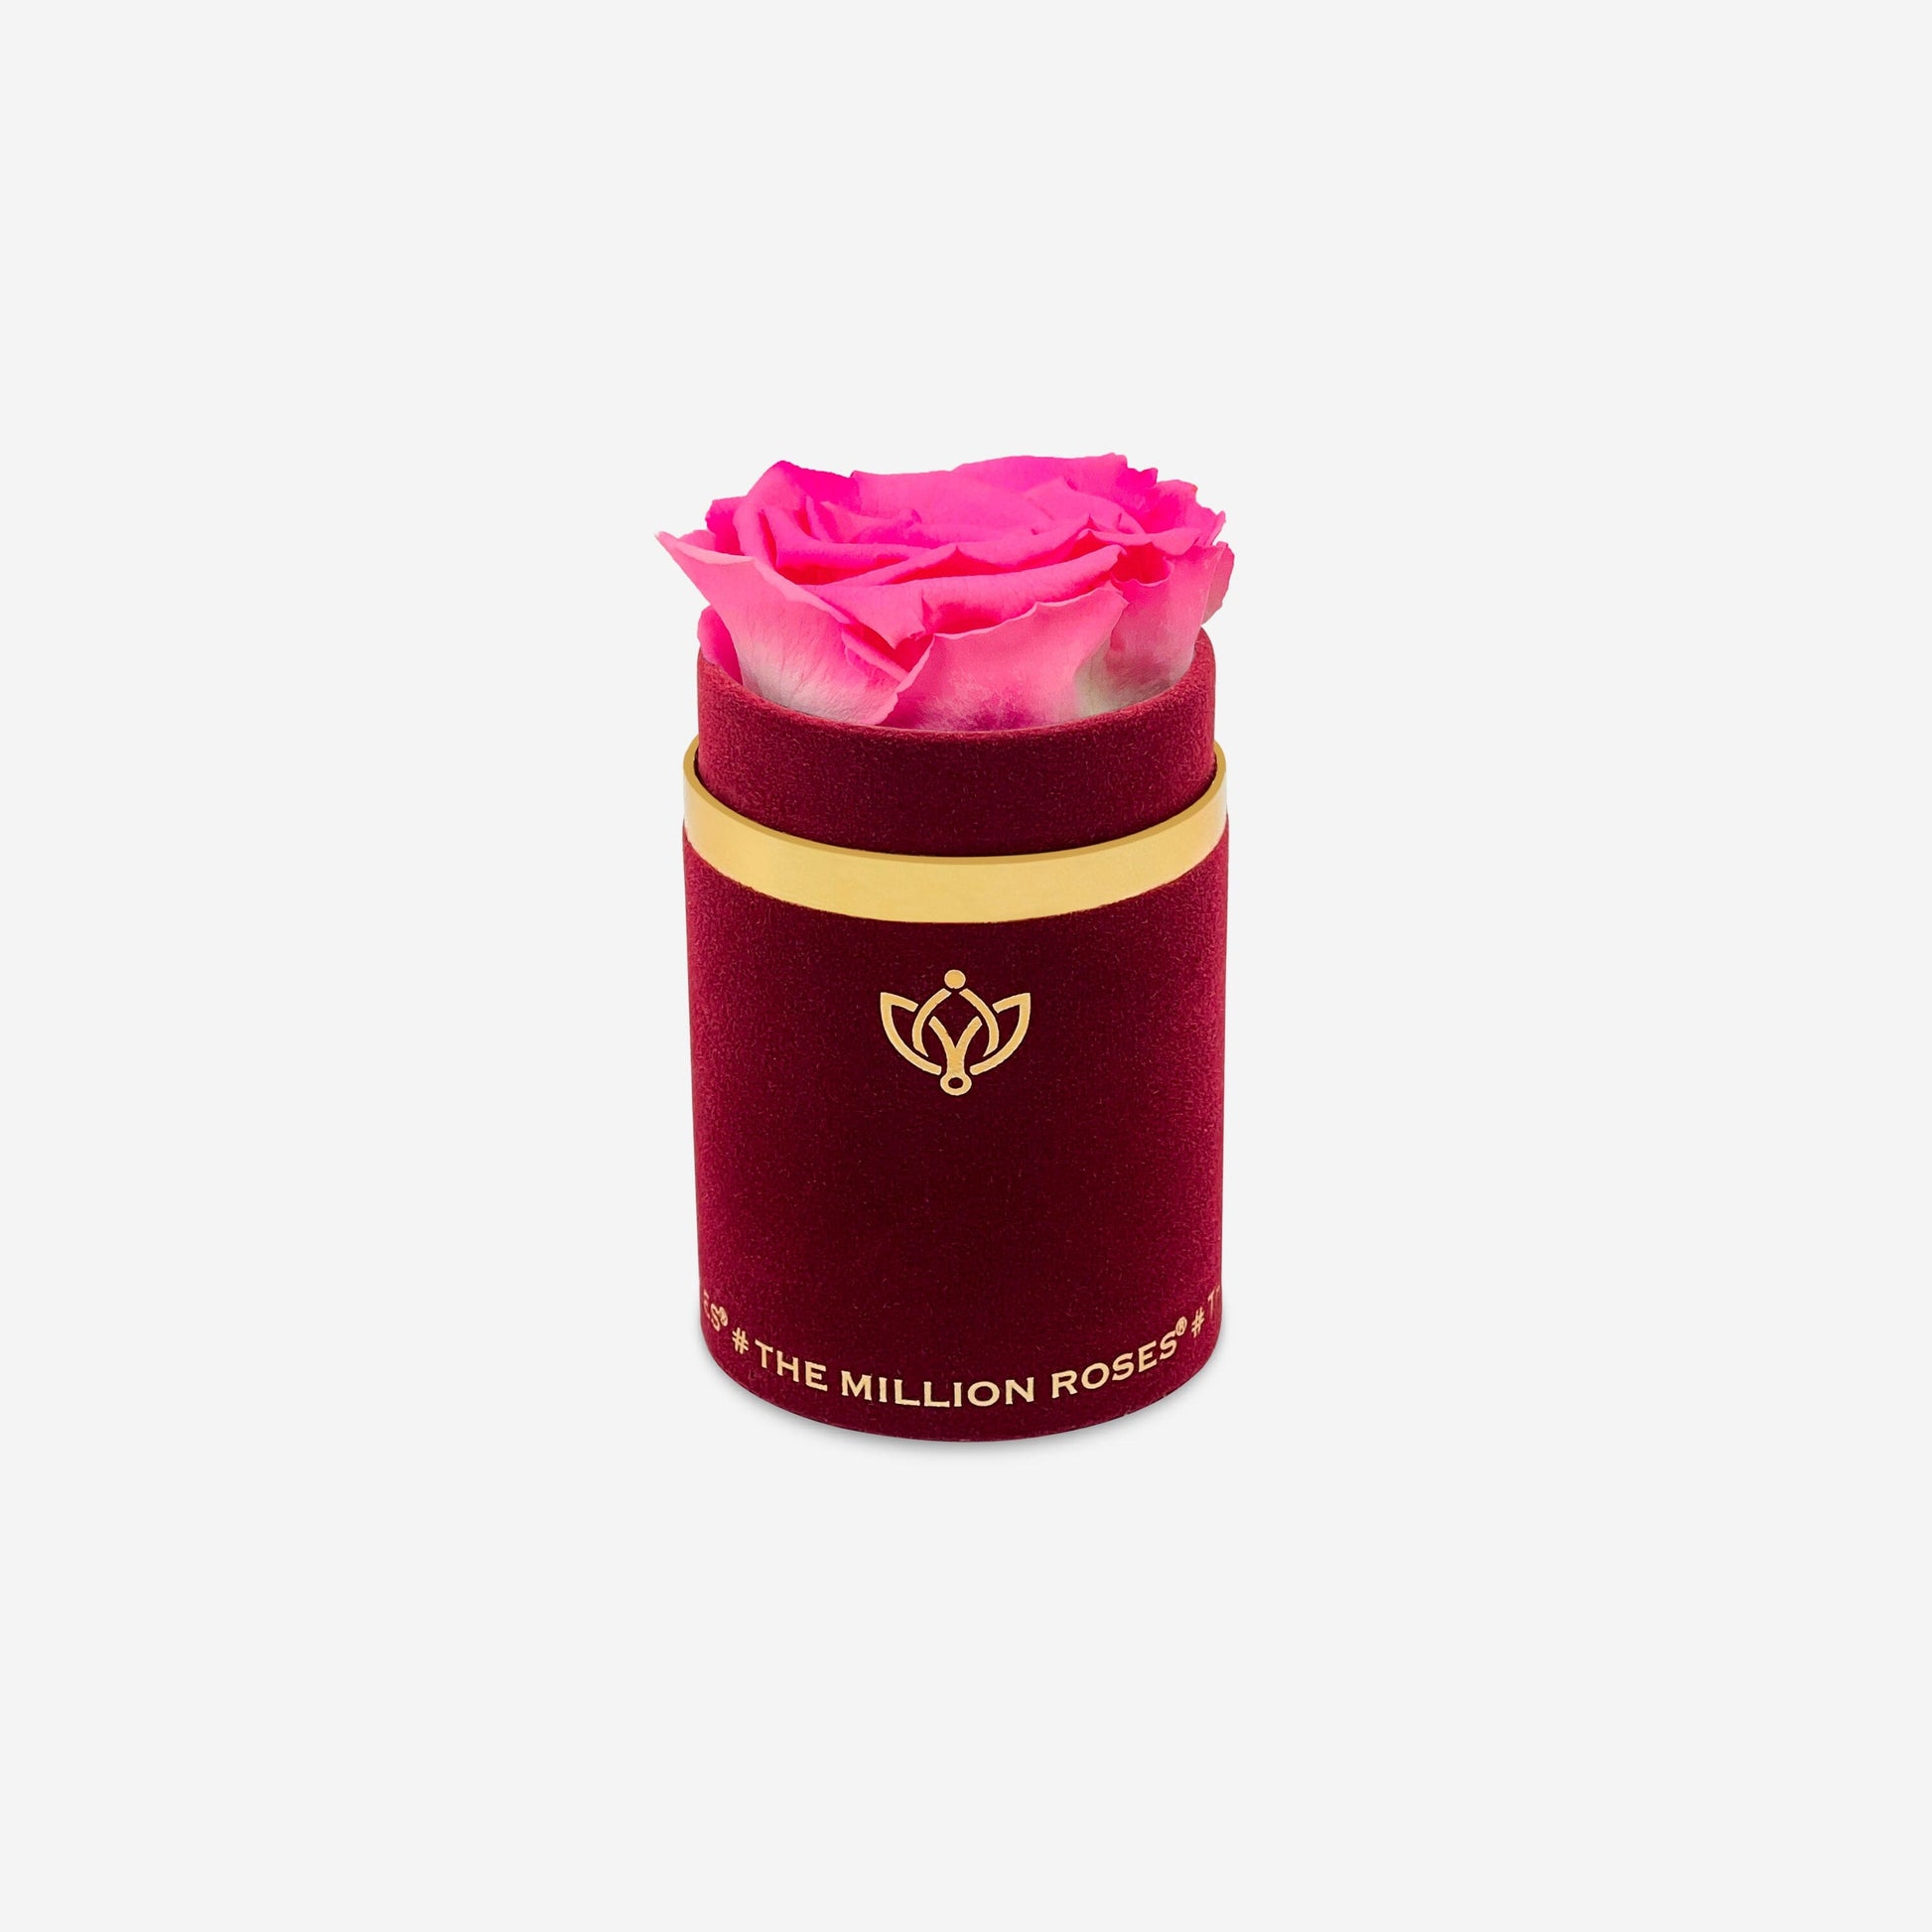 Single Bordeaux Suede Box | Candy Pink Rose - The Million Roses